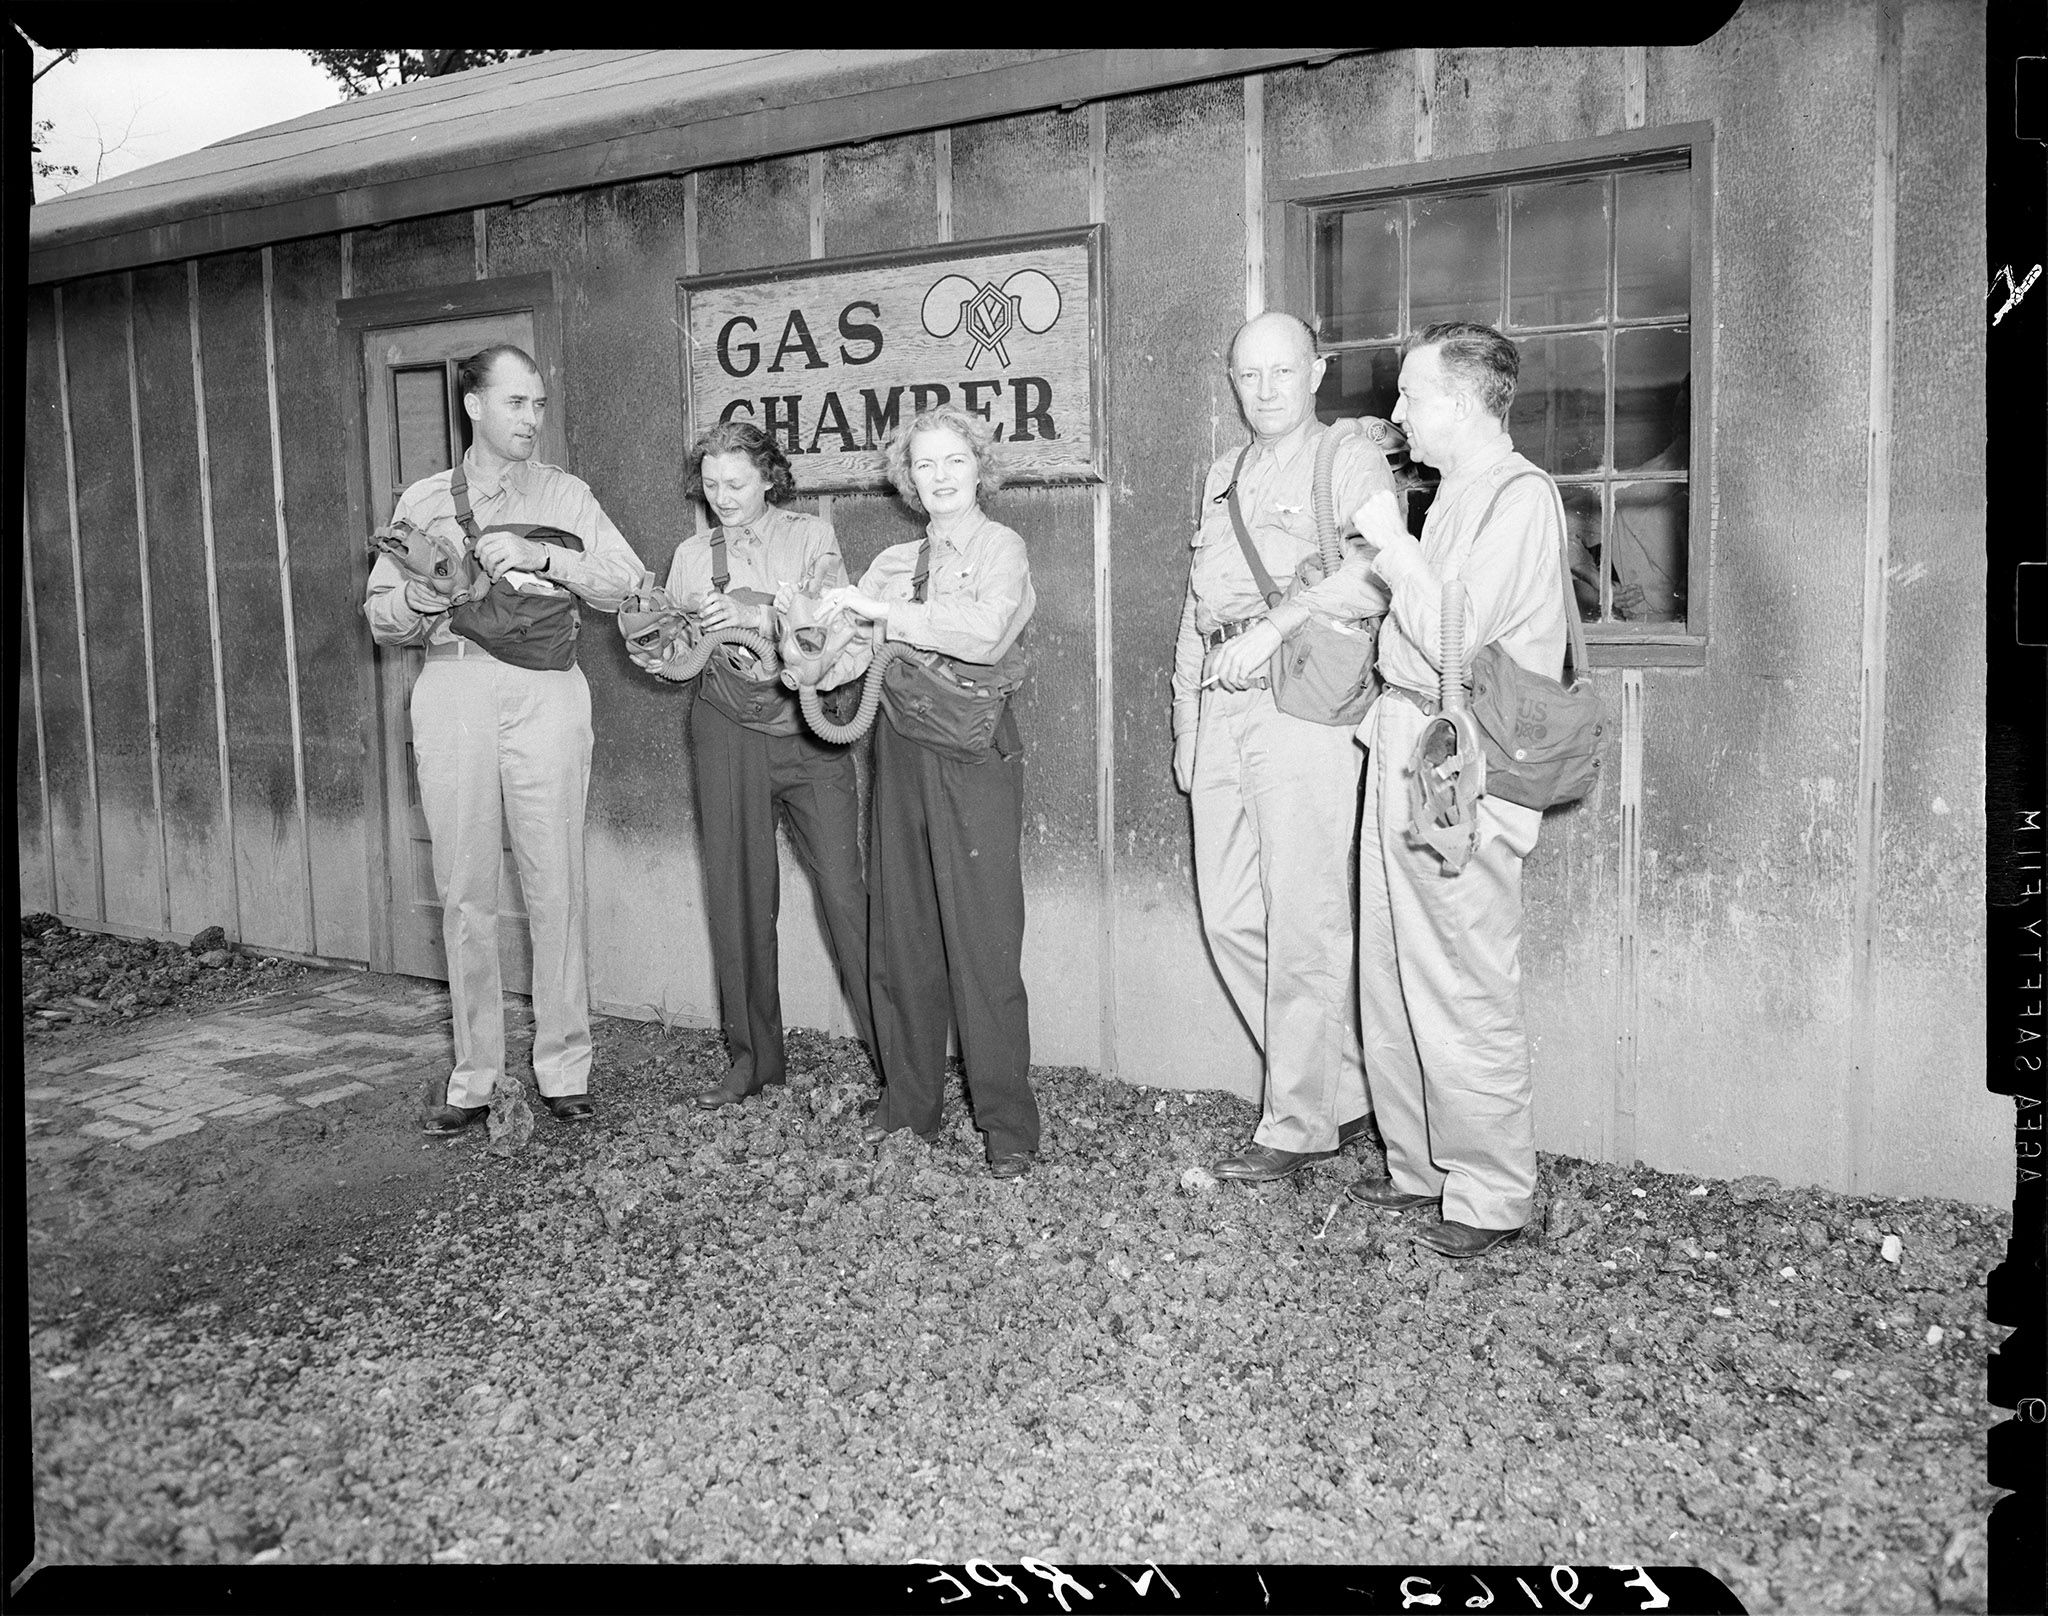 Katharine Cornell, second from left, and Margalo Gillmore, center, practice a gas mask drill by stepping into a gas chamber.